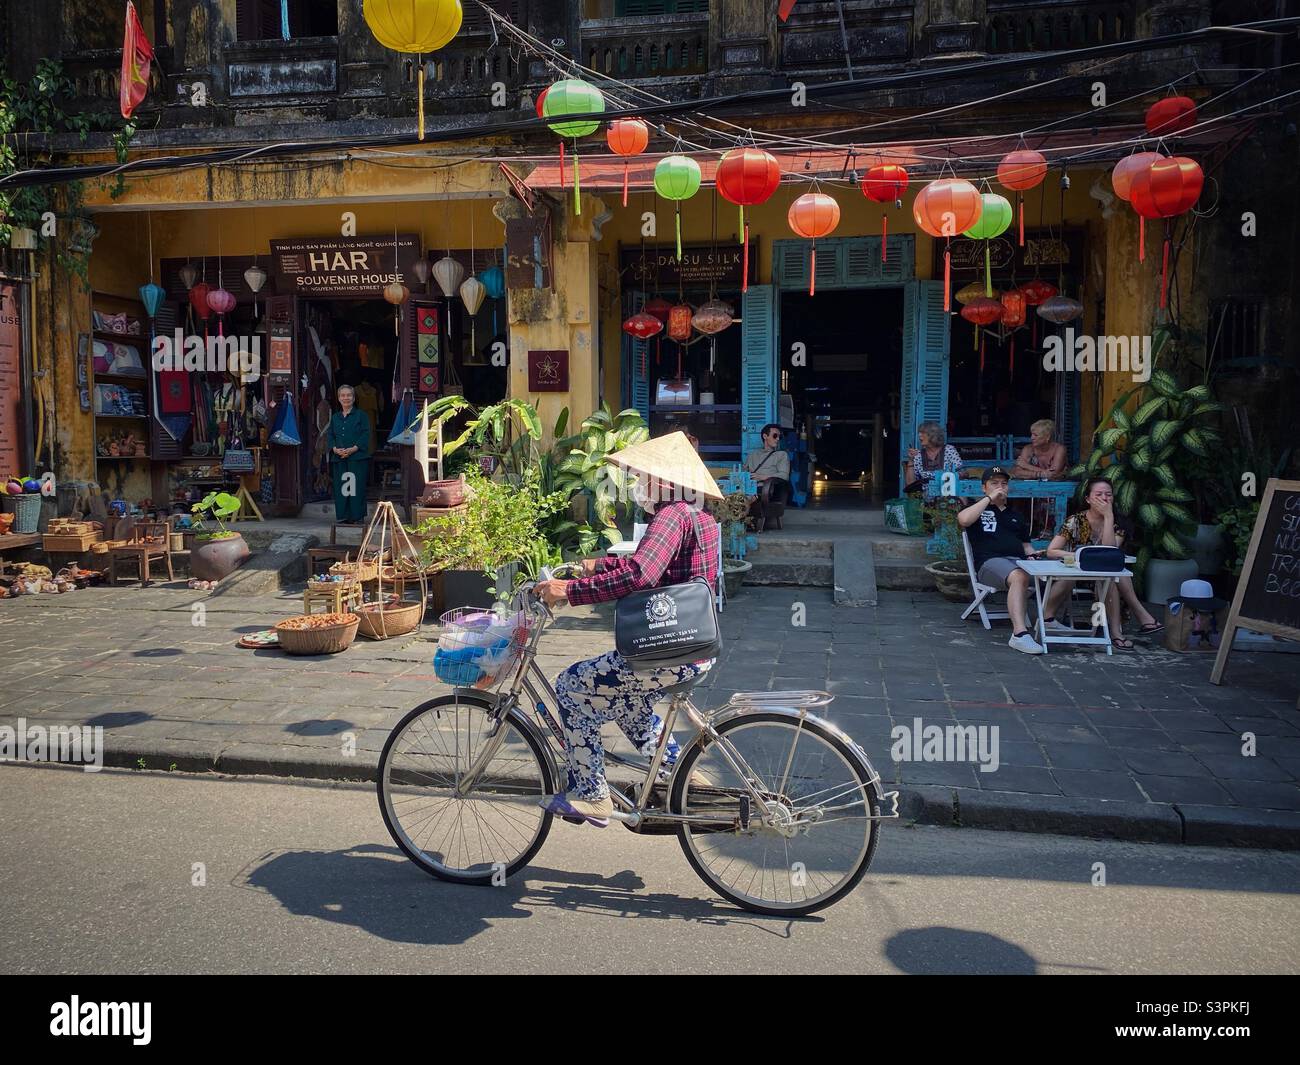 Hoi An ancient city in Vietnam. Stock Photo